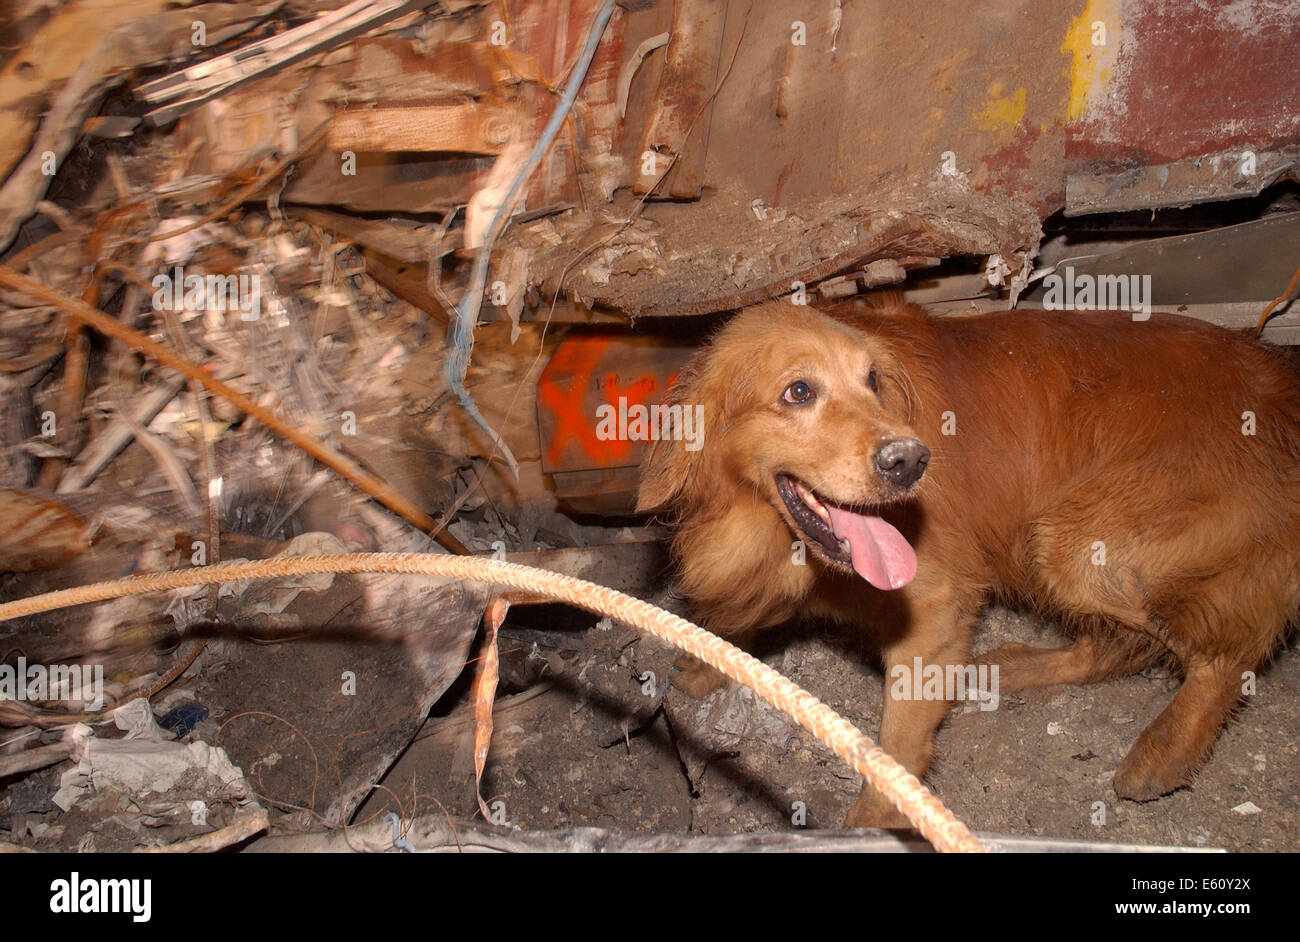 Urban search and rescue dog Thunder, searches through the rubble for victims amongst the wreckage of the World Trade Center in the aftermath of a massive terrorist attack which destroyed the twin towers killing 2,606 people September 21, 2001 in New York, NY. Stock Photo